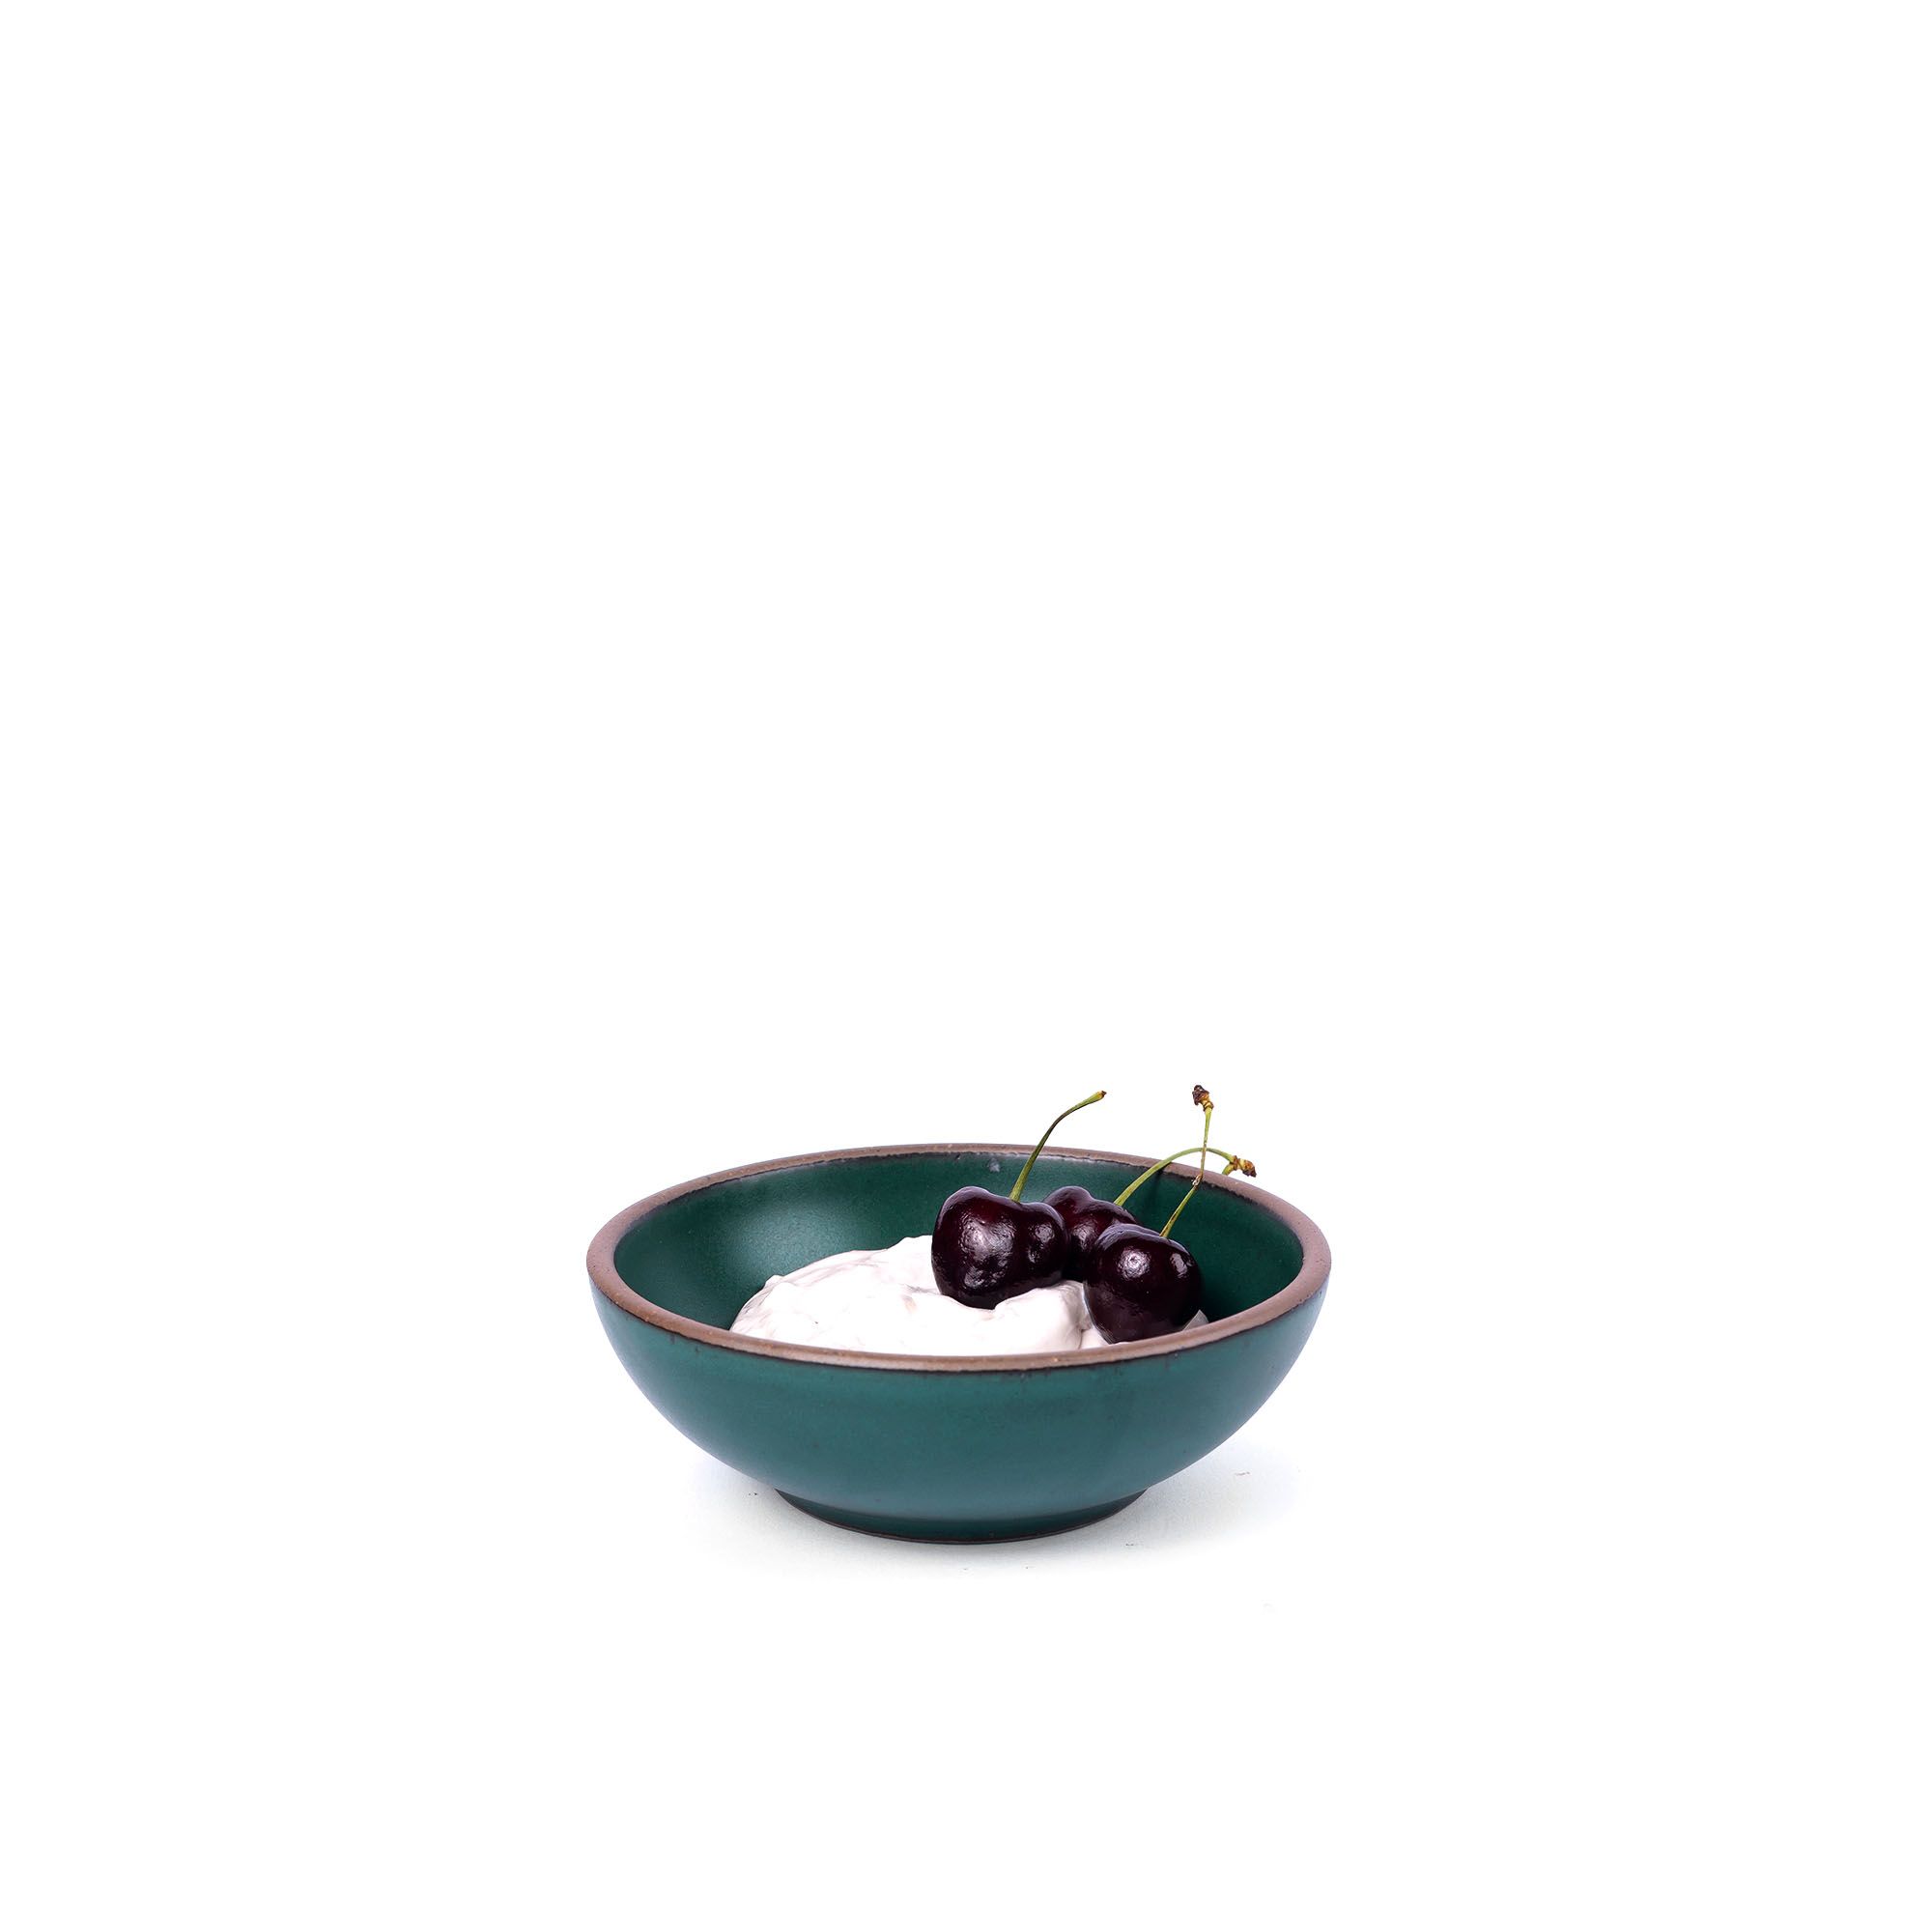 Yogurt and cherries in a small shallow ceramic bowl in a deep dark teal color featuring iron speckles and an unglazed rim